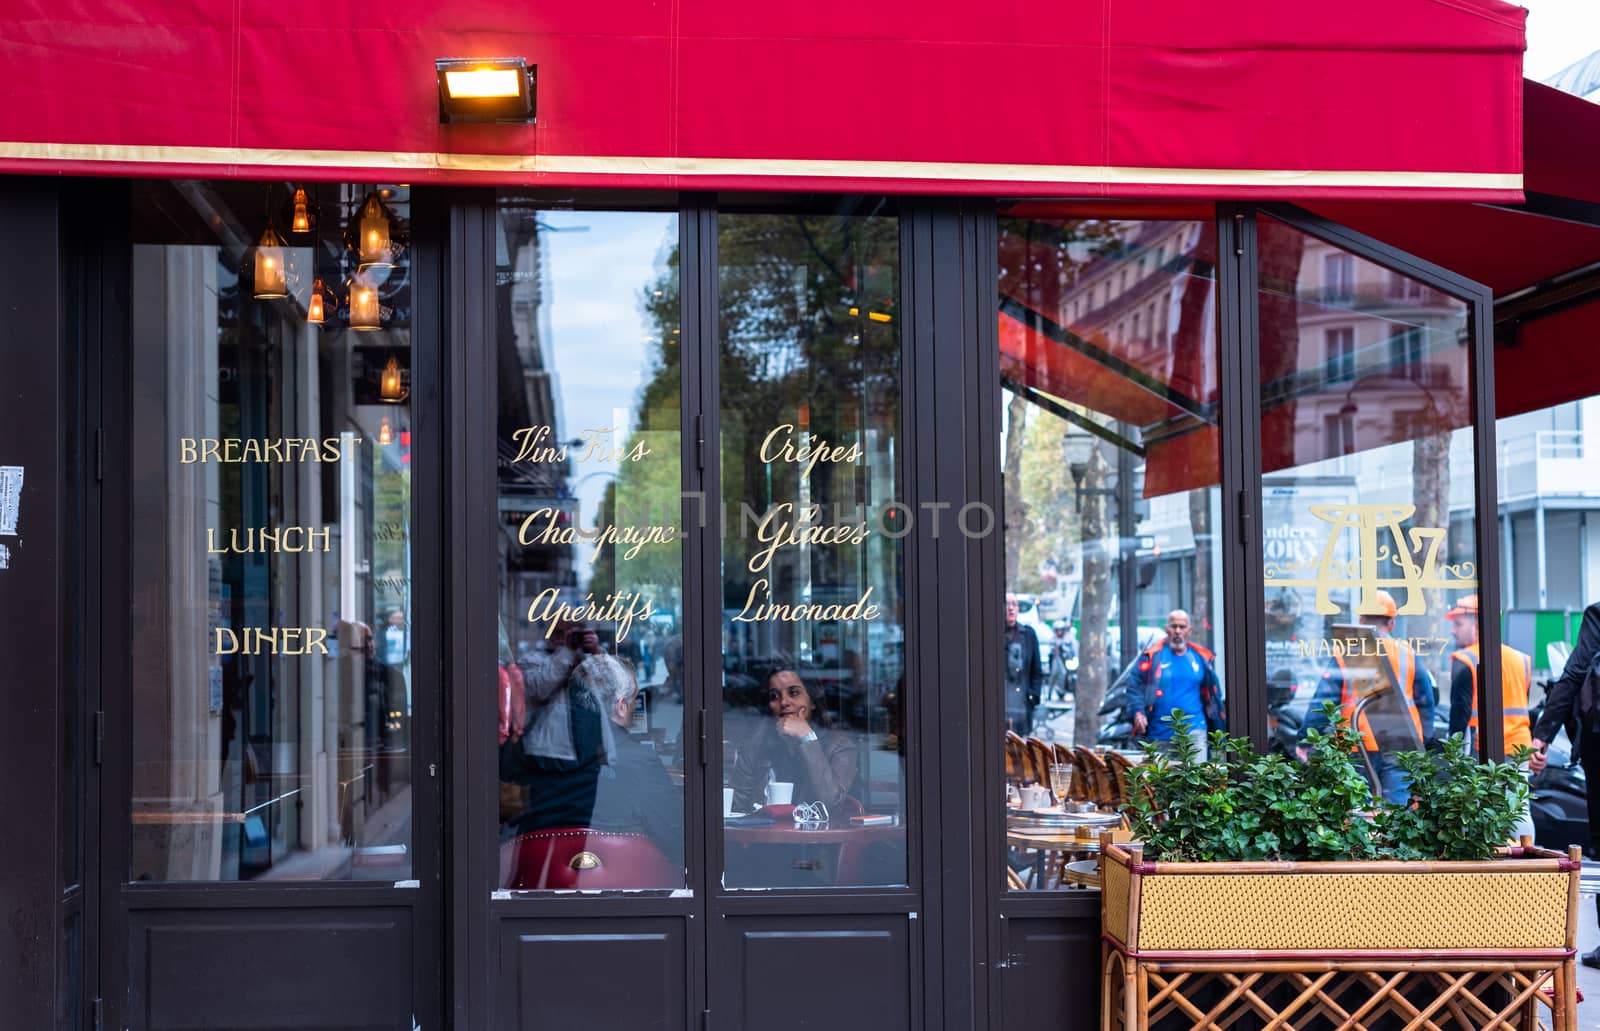 Paris, France -- November 3, 2017 -- People sit inside a Parisian bistro while pedestrians walk past and glance in the window.